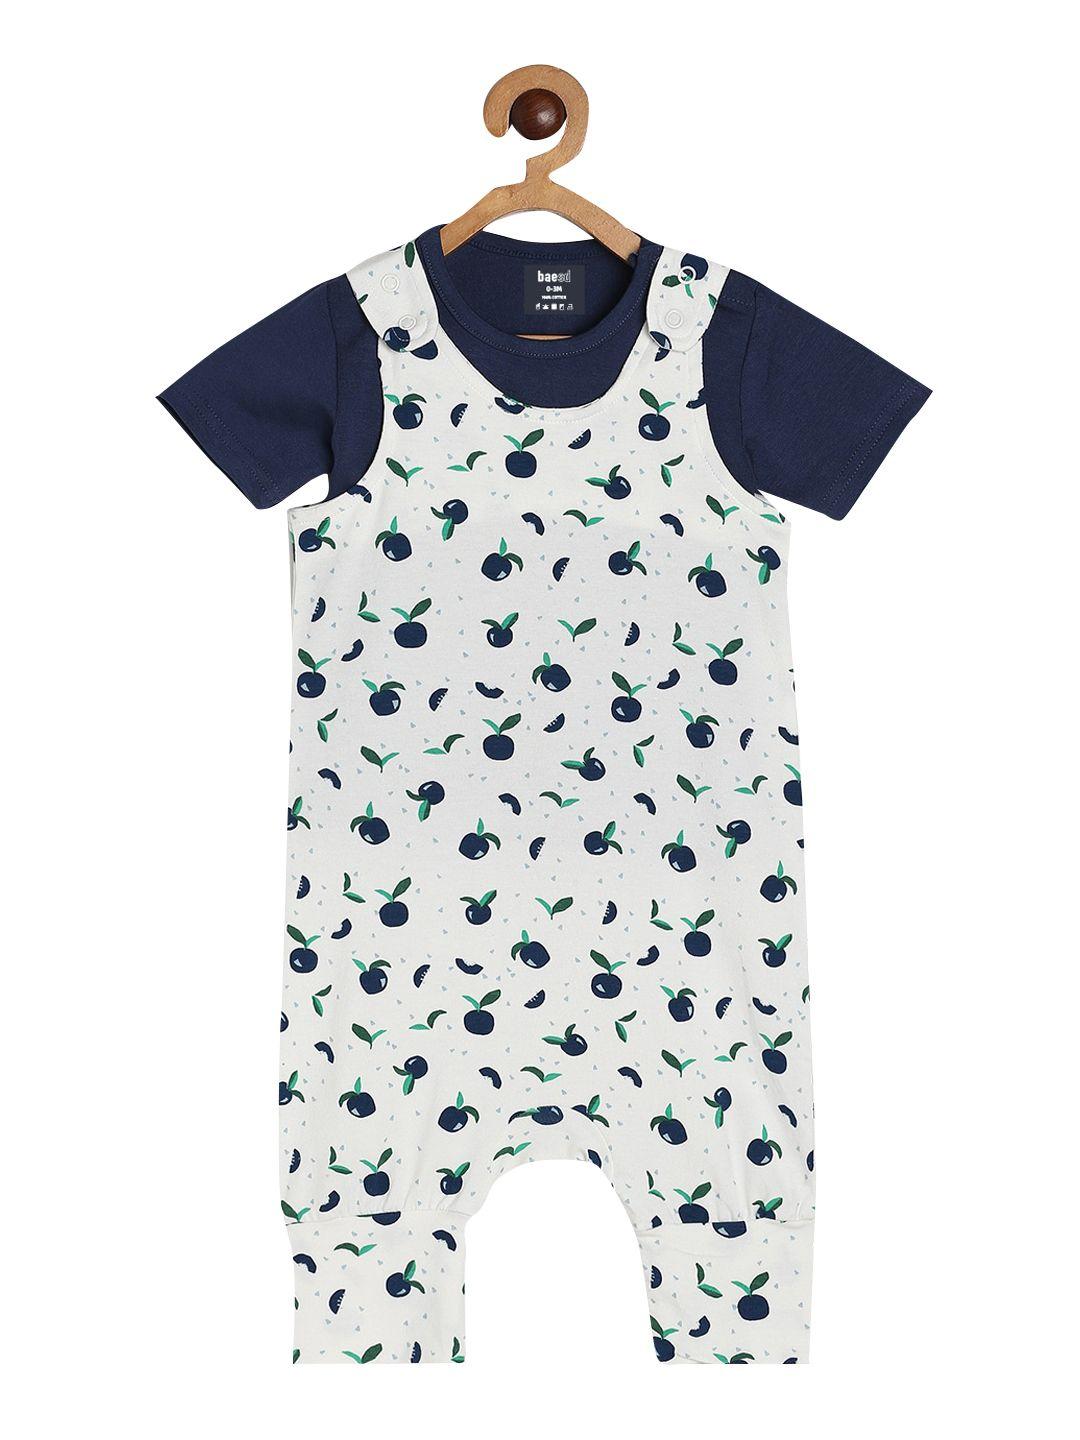 baesd-infants-kids-printed-dungaree-with-t-shirt